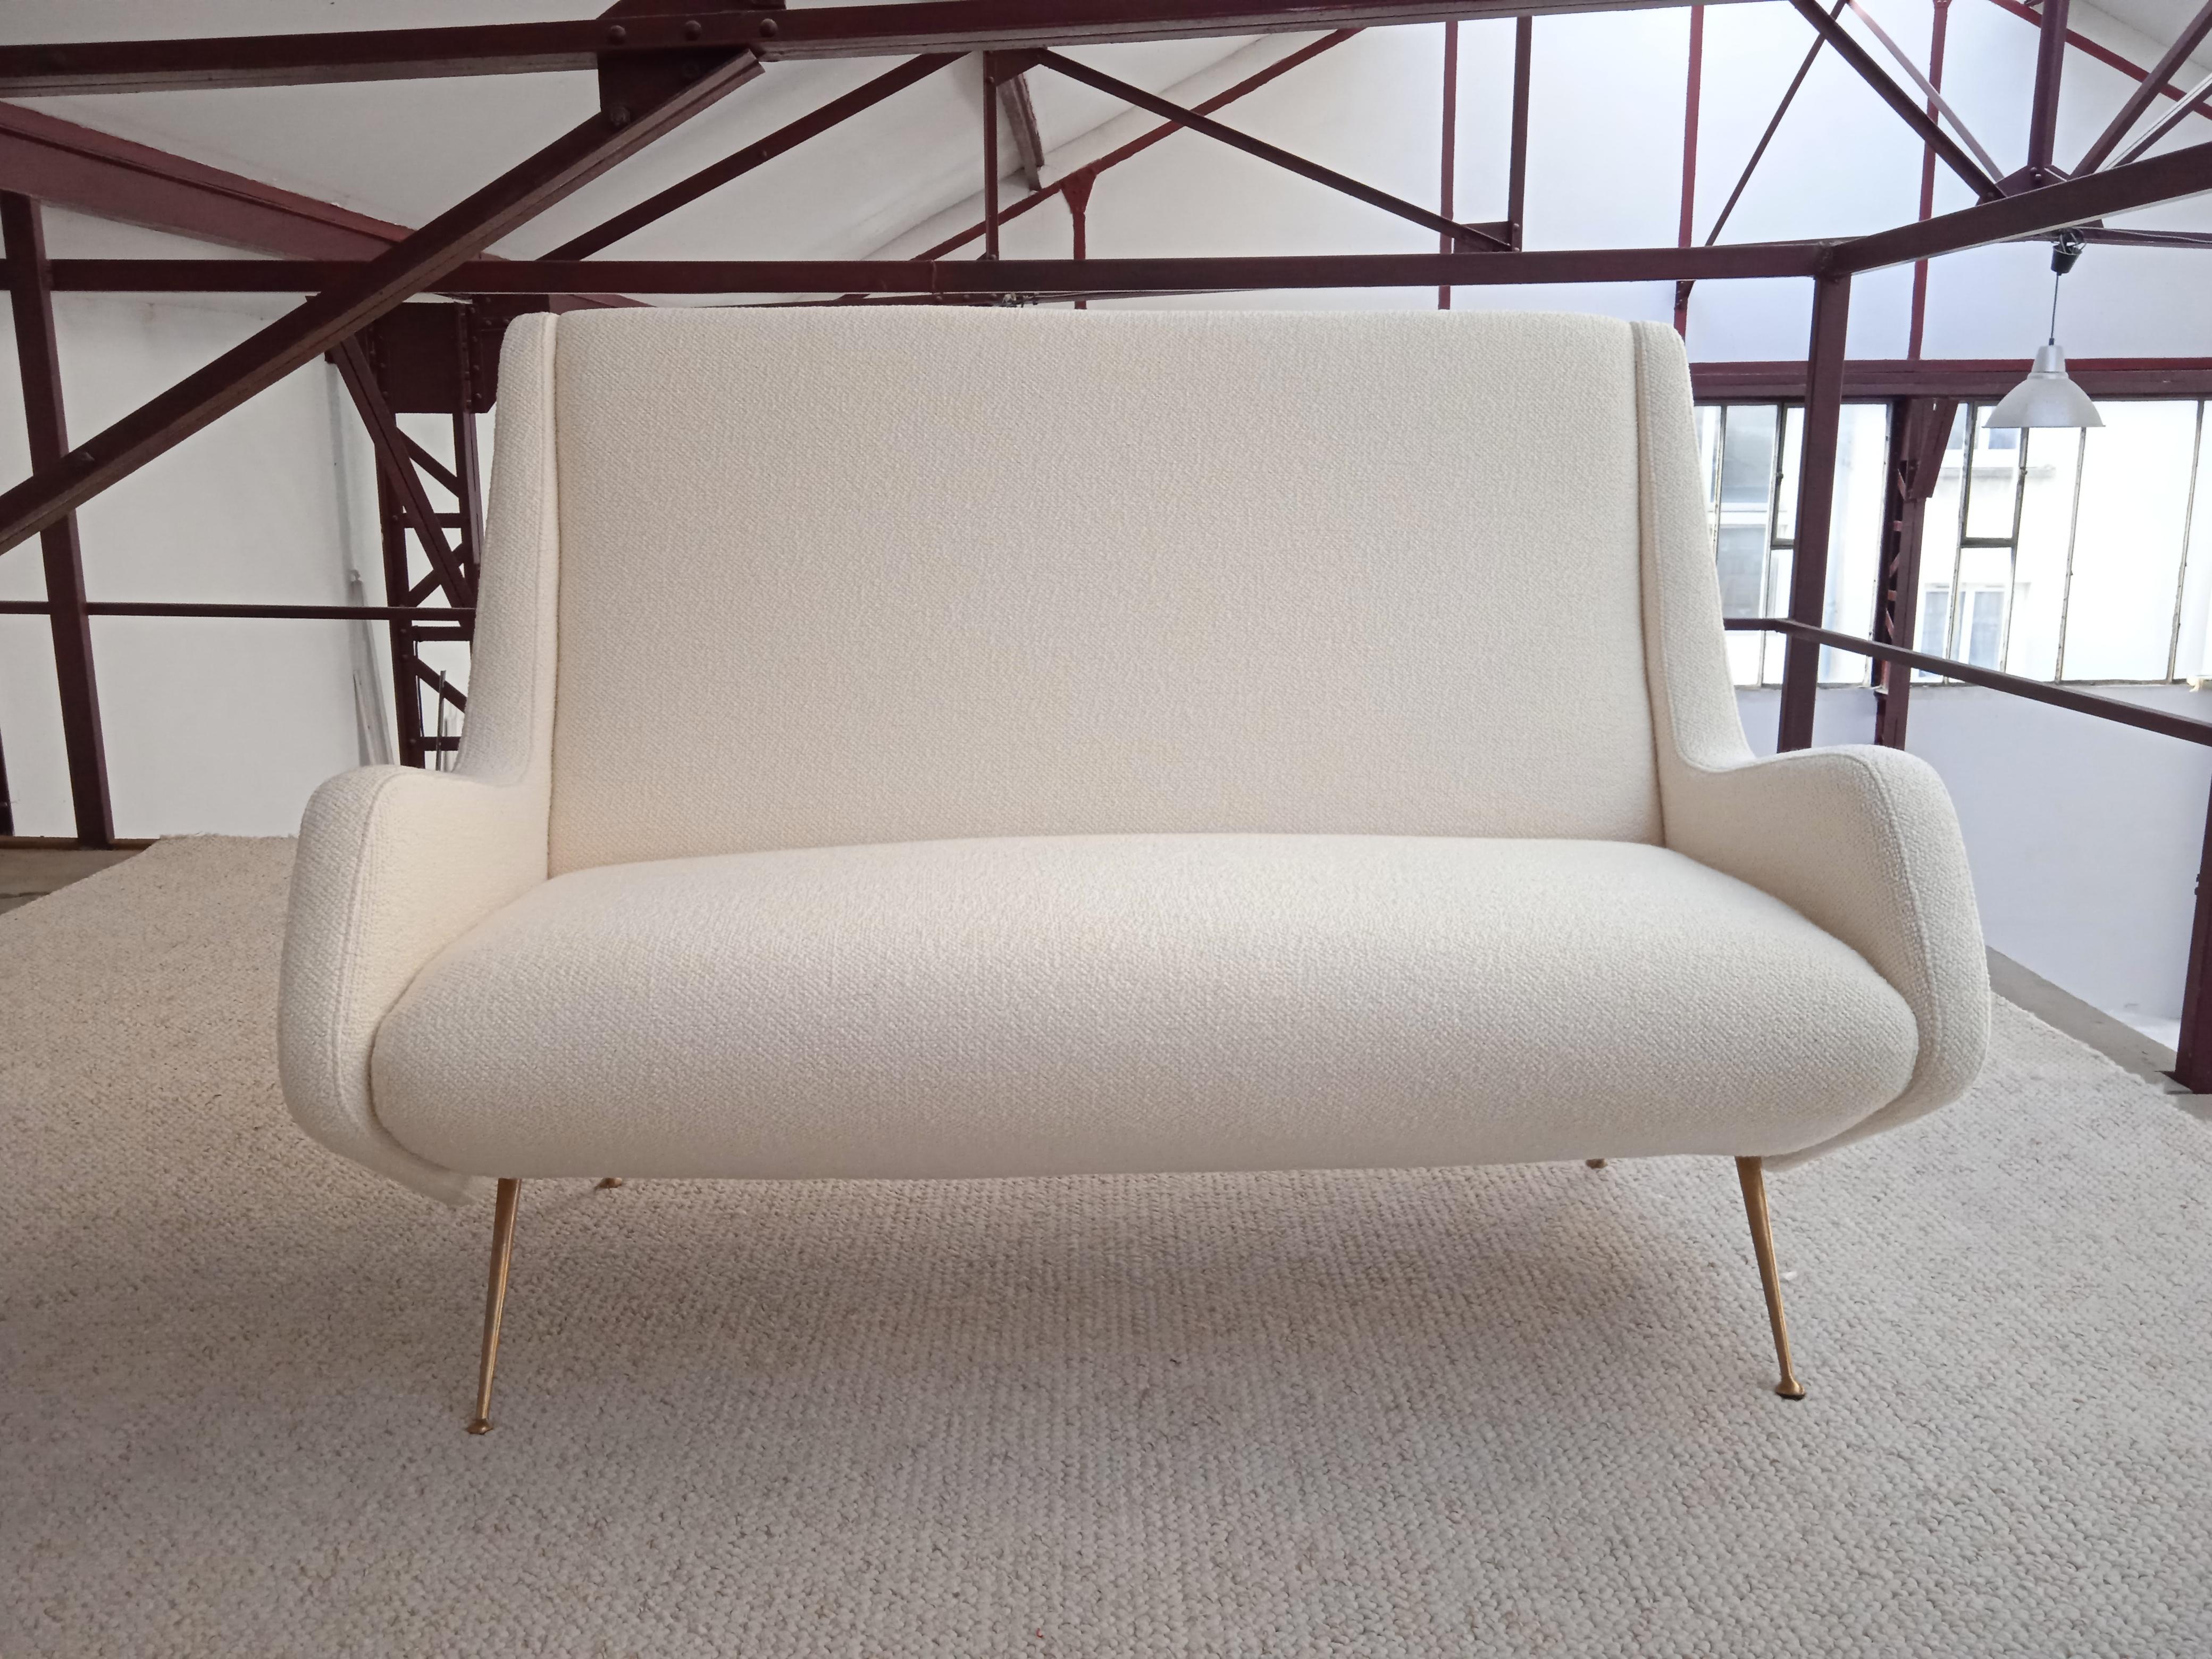 2 Seats sofa by Aldo Morbelli for ISA Bergamo, Italy 1950s.
Re-upholstered in Sherpa bouclé from Lelièvre Paris. 
The feet are in golden brass.
Very nice condition.